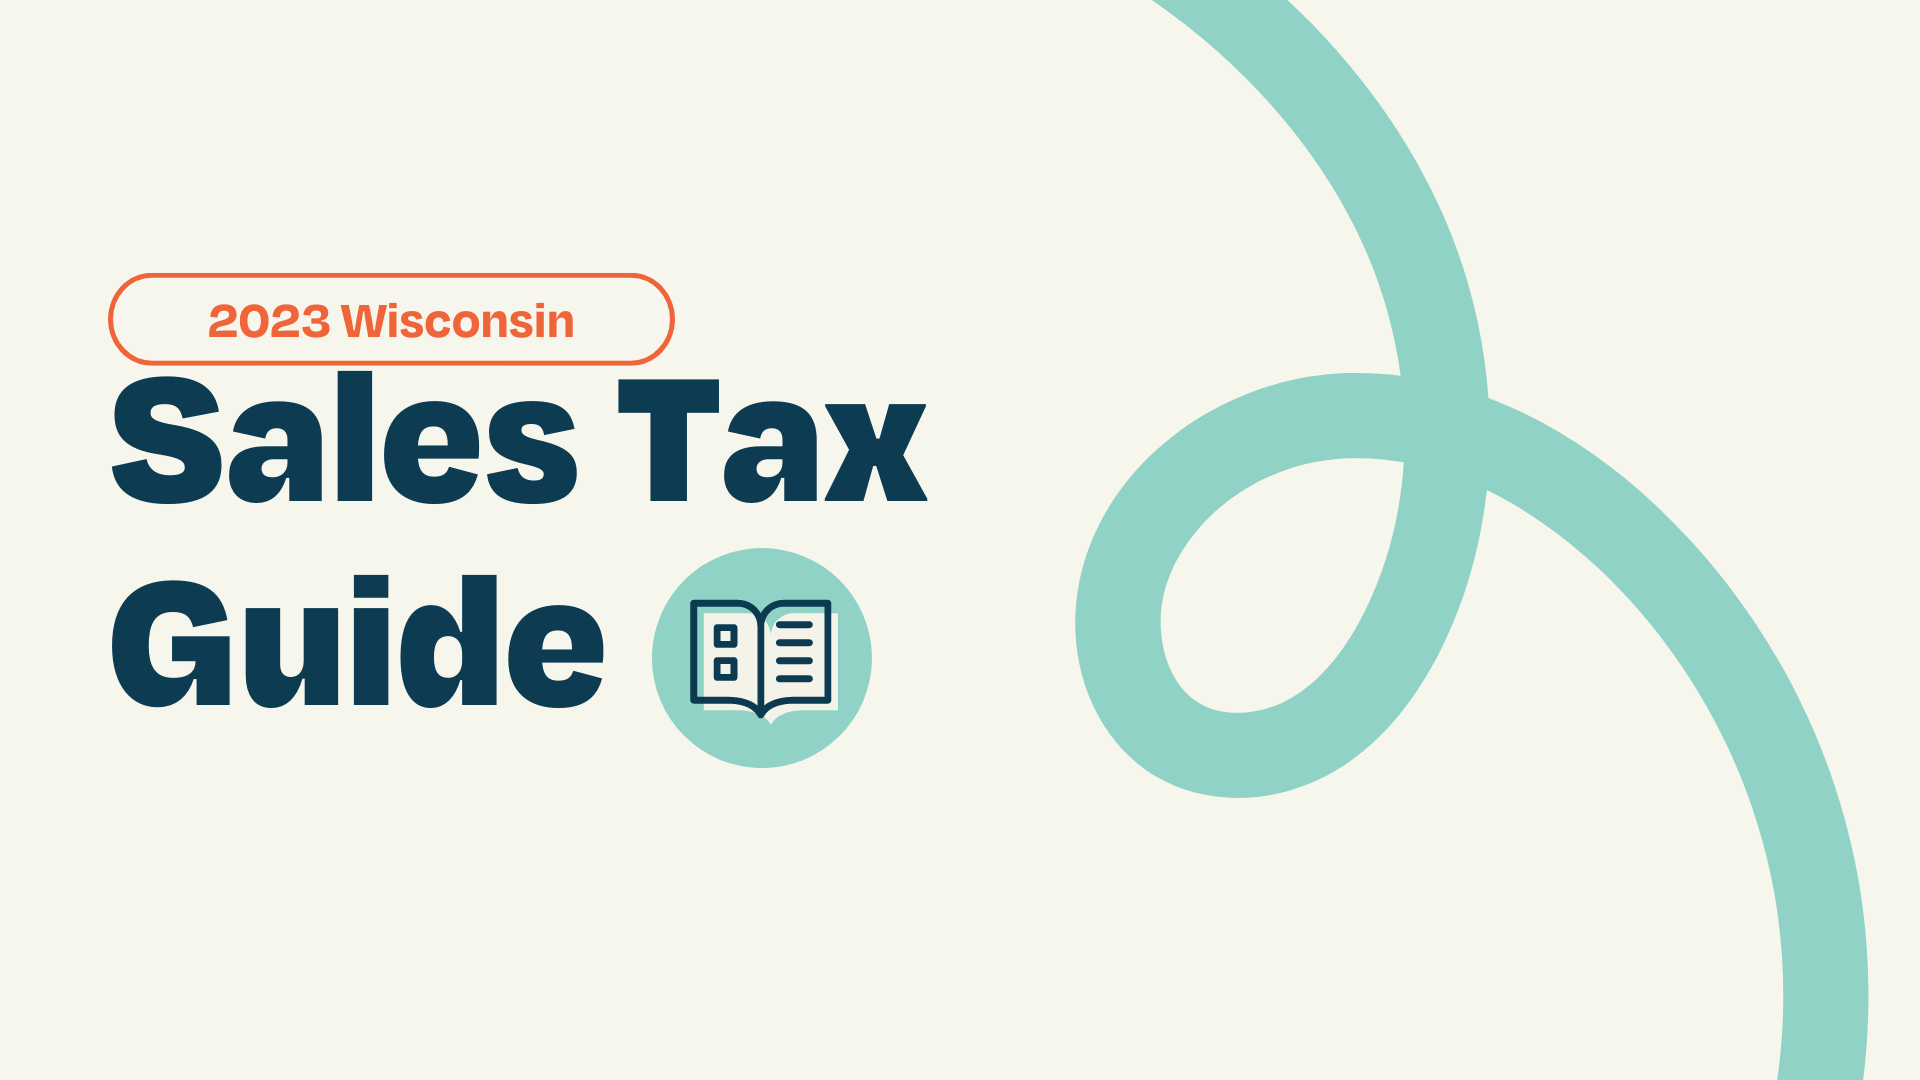 Wisconsin 2023 Sales Tax Guide